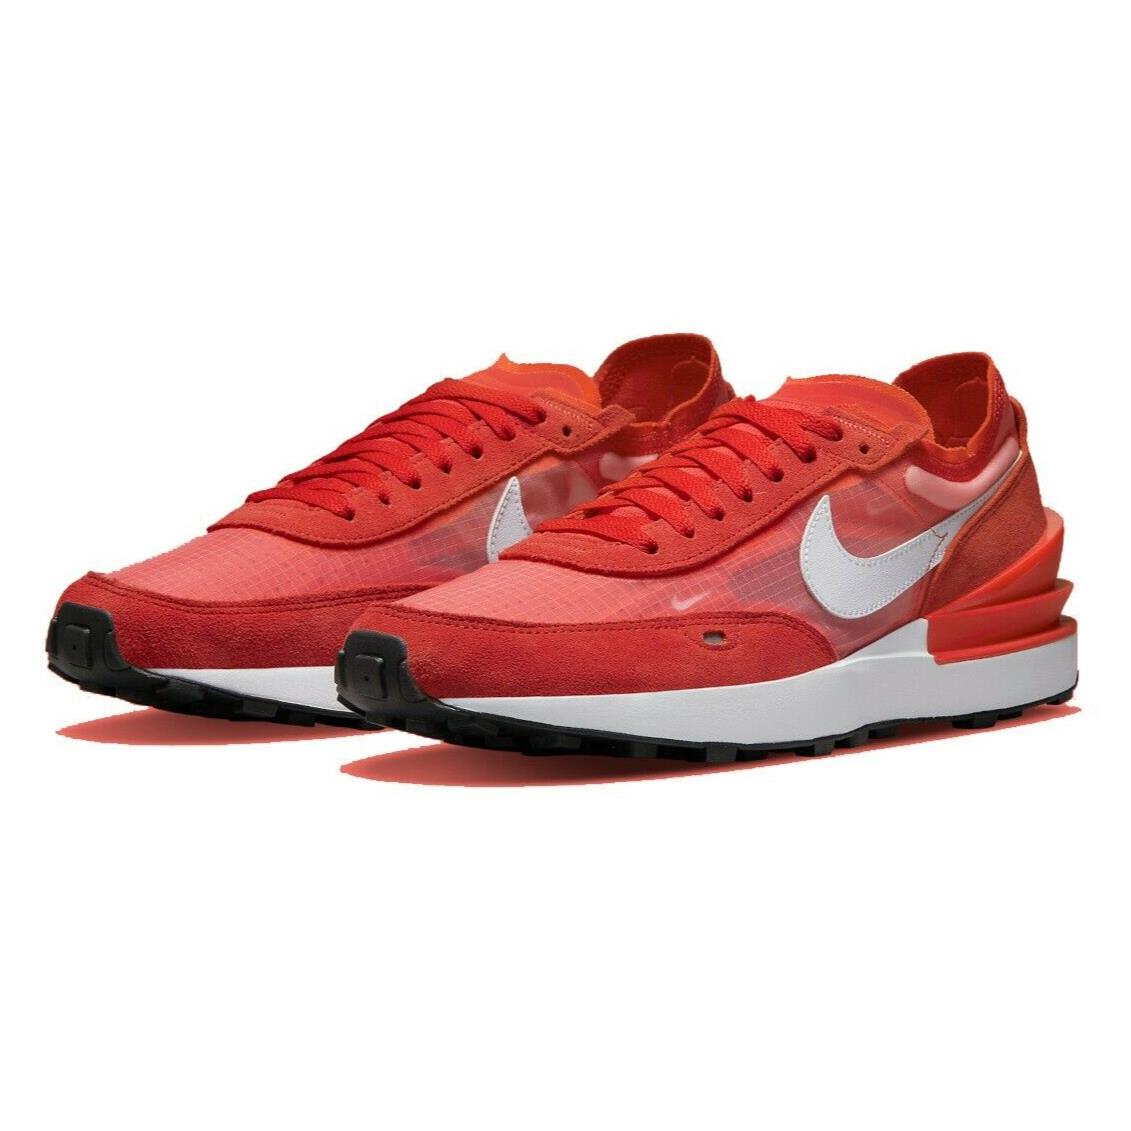 Nike Waffle One SE Mens Size 6.5 Sneaker Shoes DD8014 601 Habanero Red White